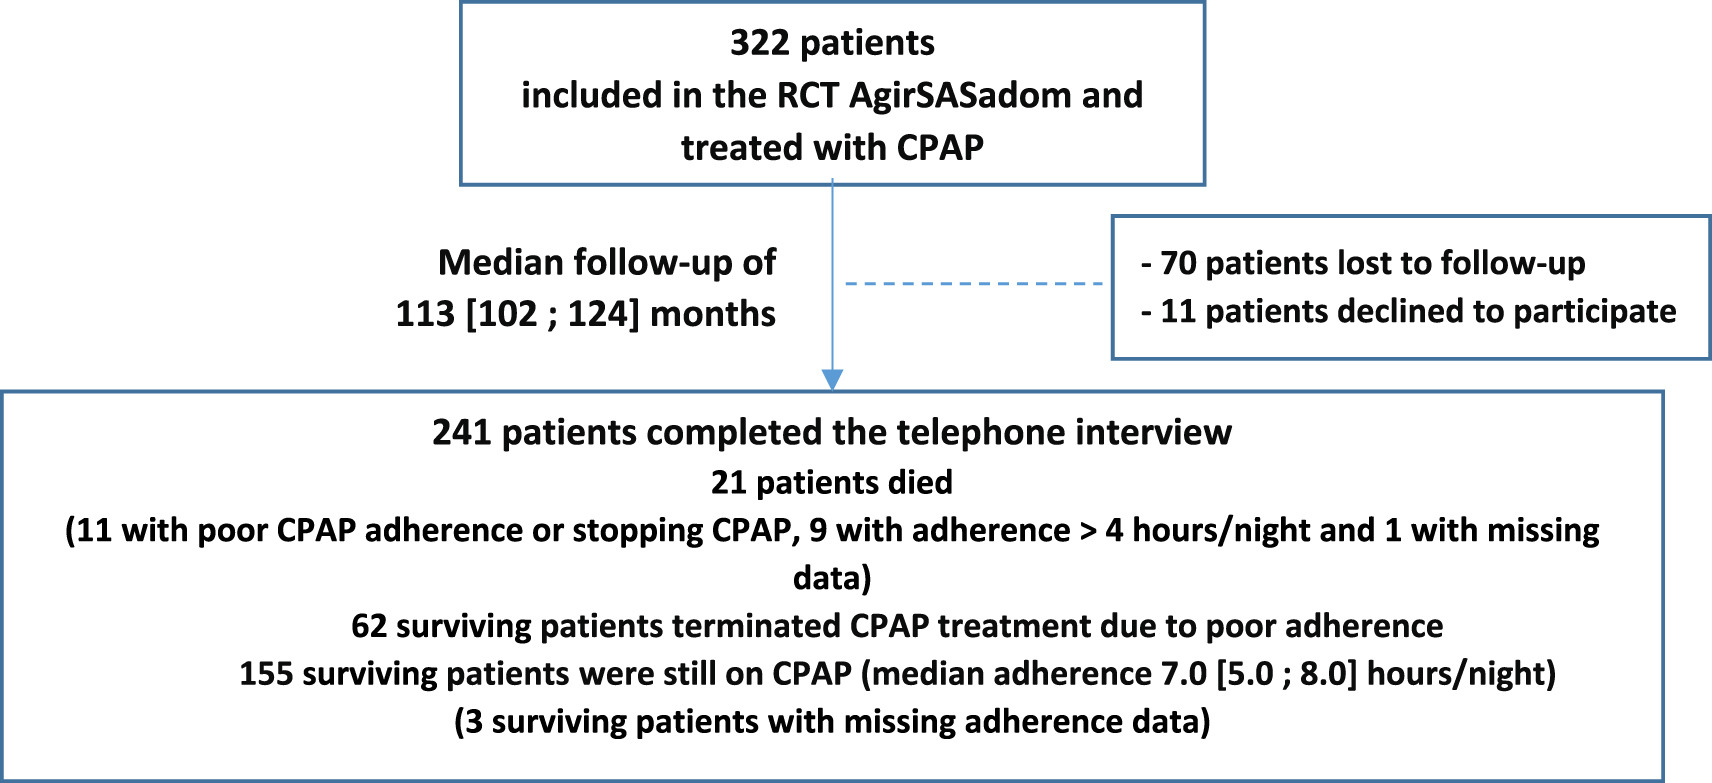 Long-term outcomes of CPAP-treated sleep apnea patients: Impact of blood-pressure responses after CPAP initiation and of treatment adherence